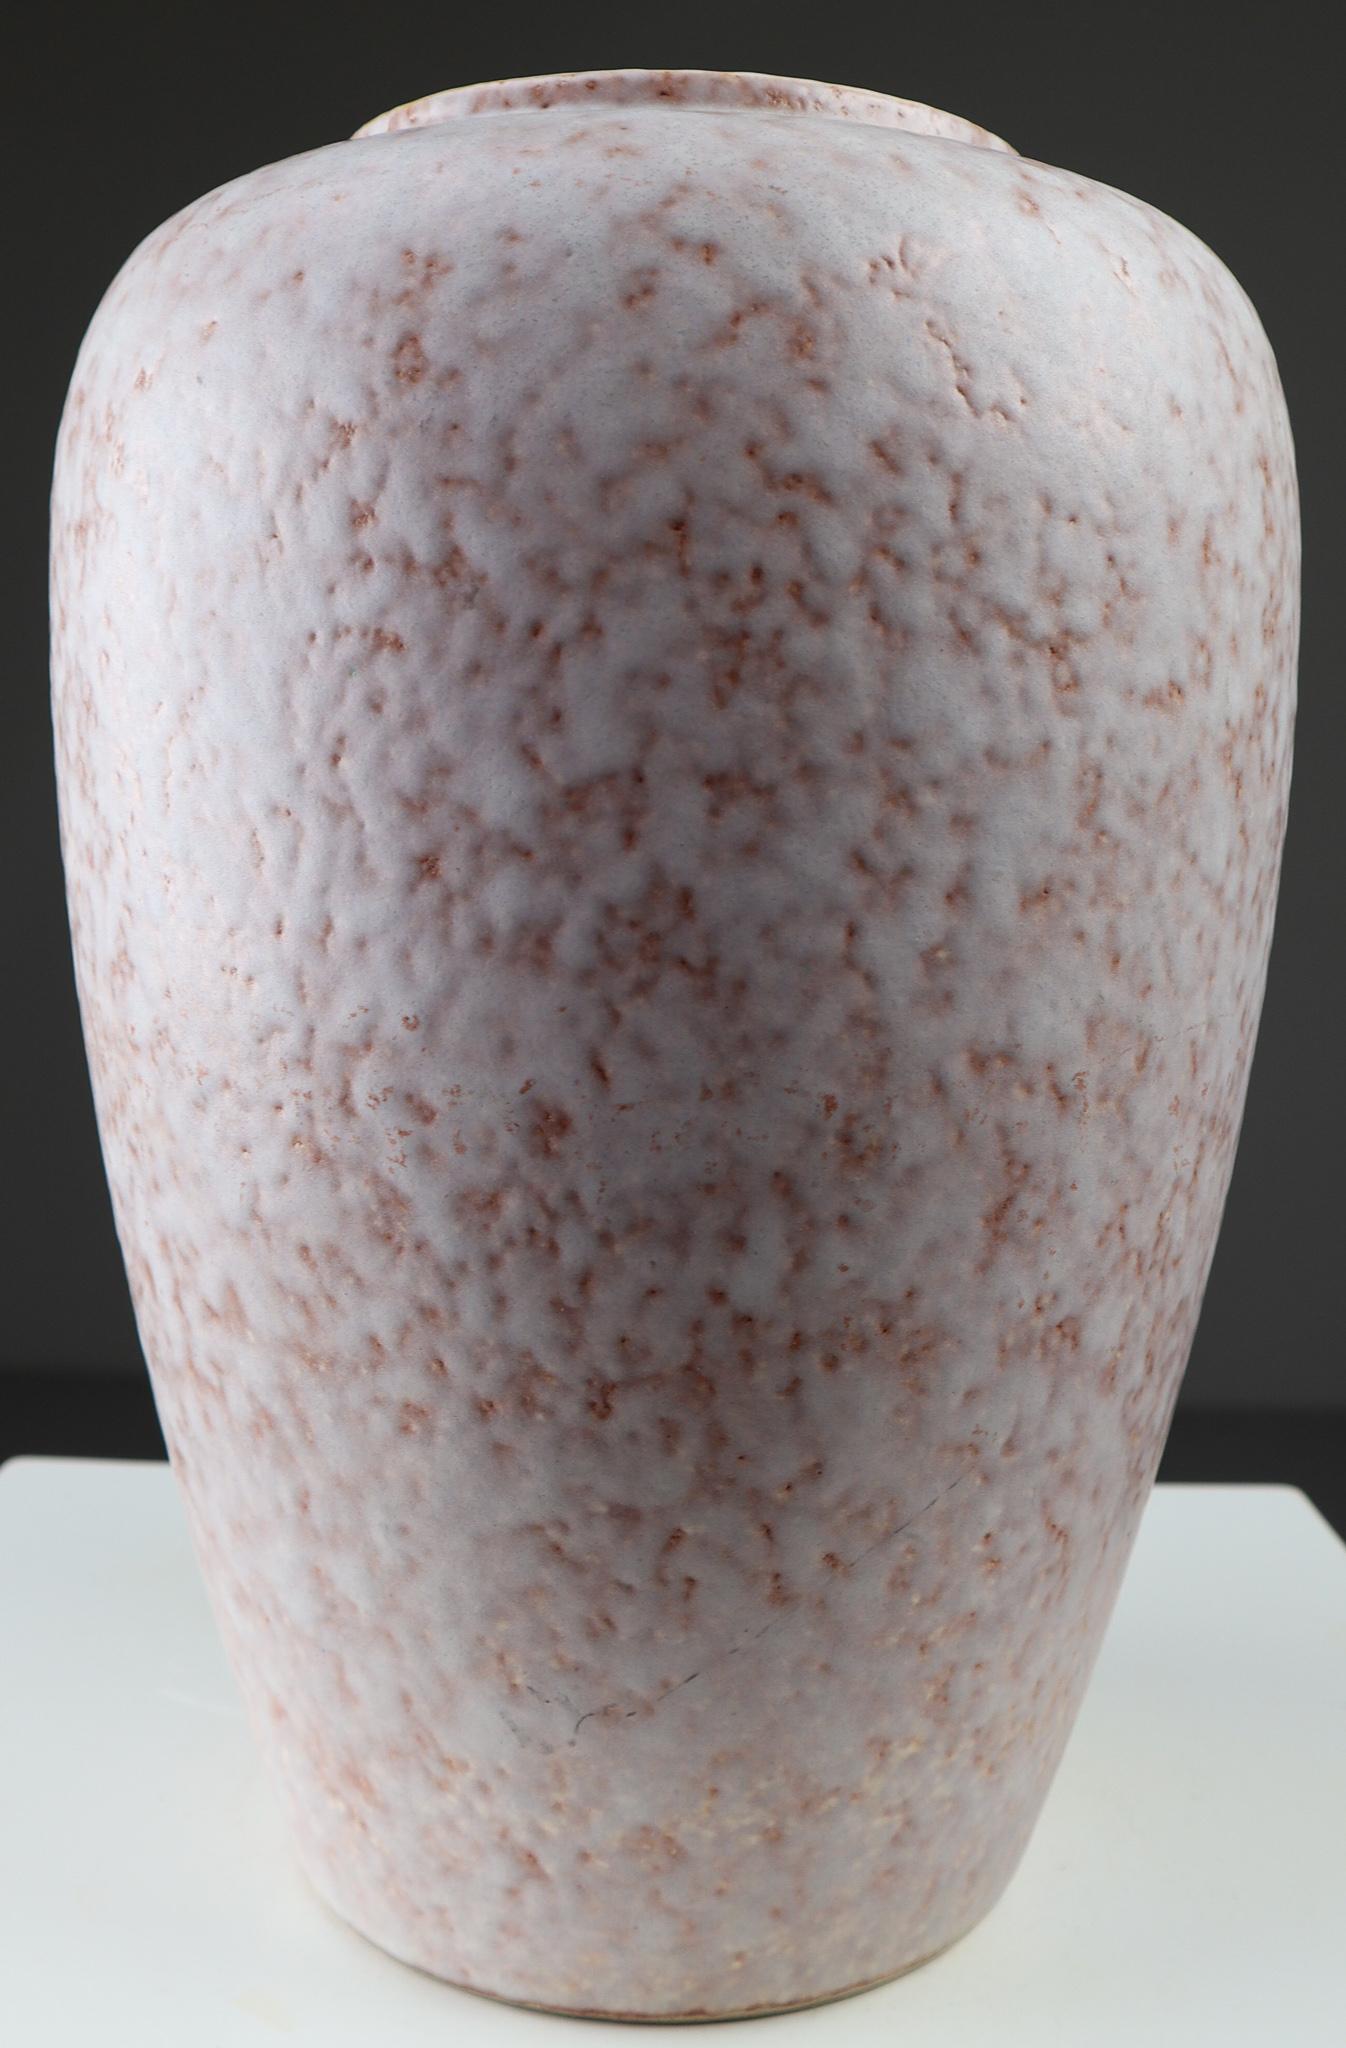 Modern Austrian ceramic vase has a gorgeous interior glaze of light yellow/cream. The vase has a abstract pattern in a white/old pink color. The vase is marked with the production number No: 239-30 and land of production Austria. In very good